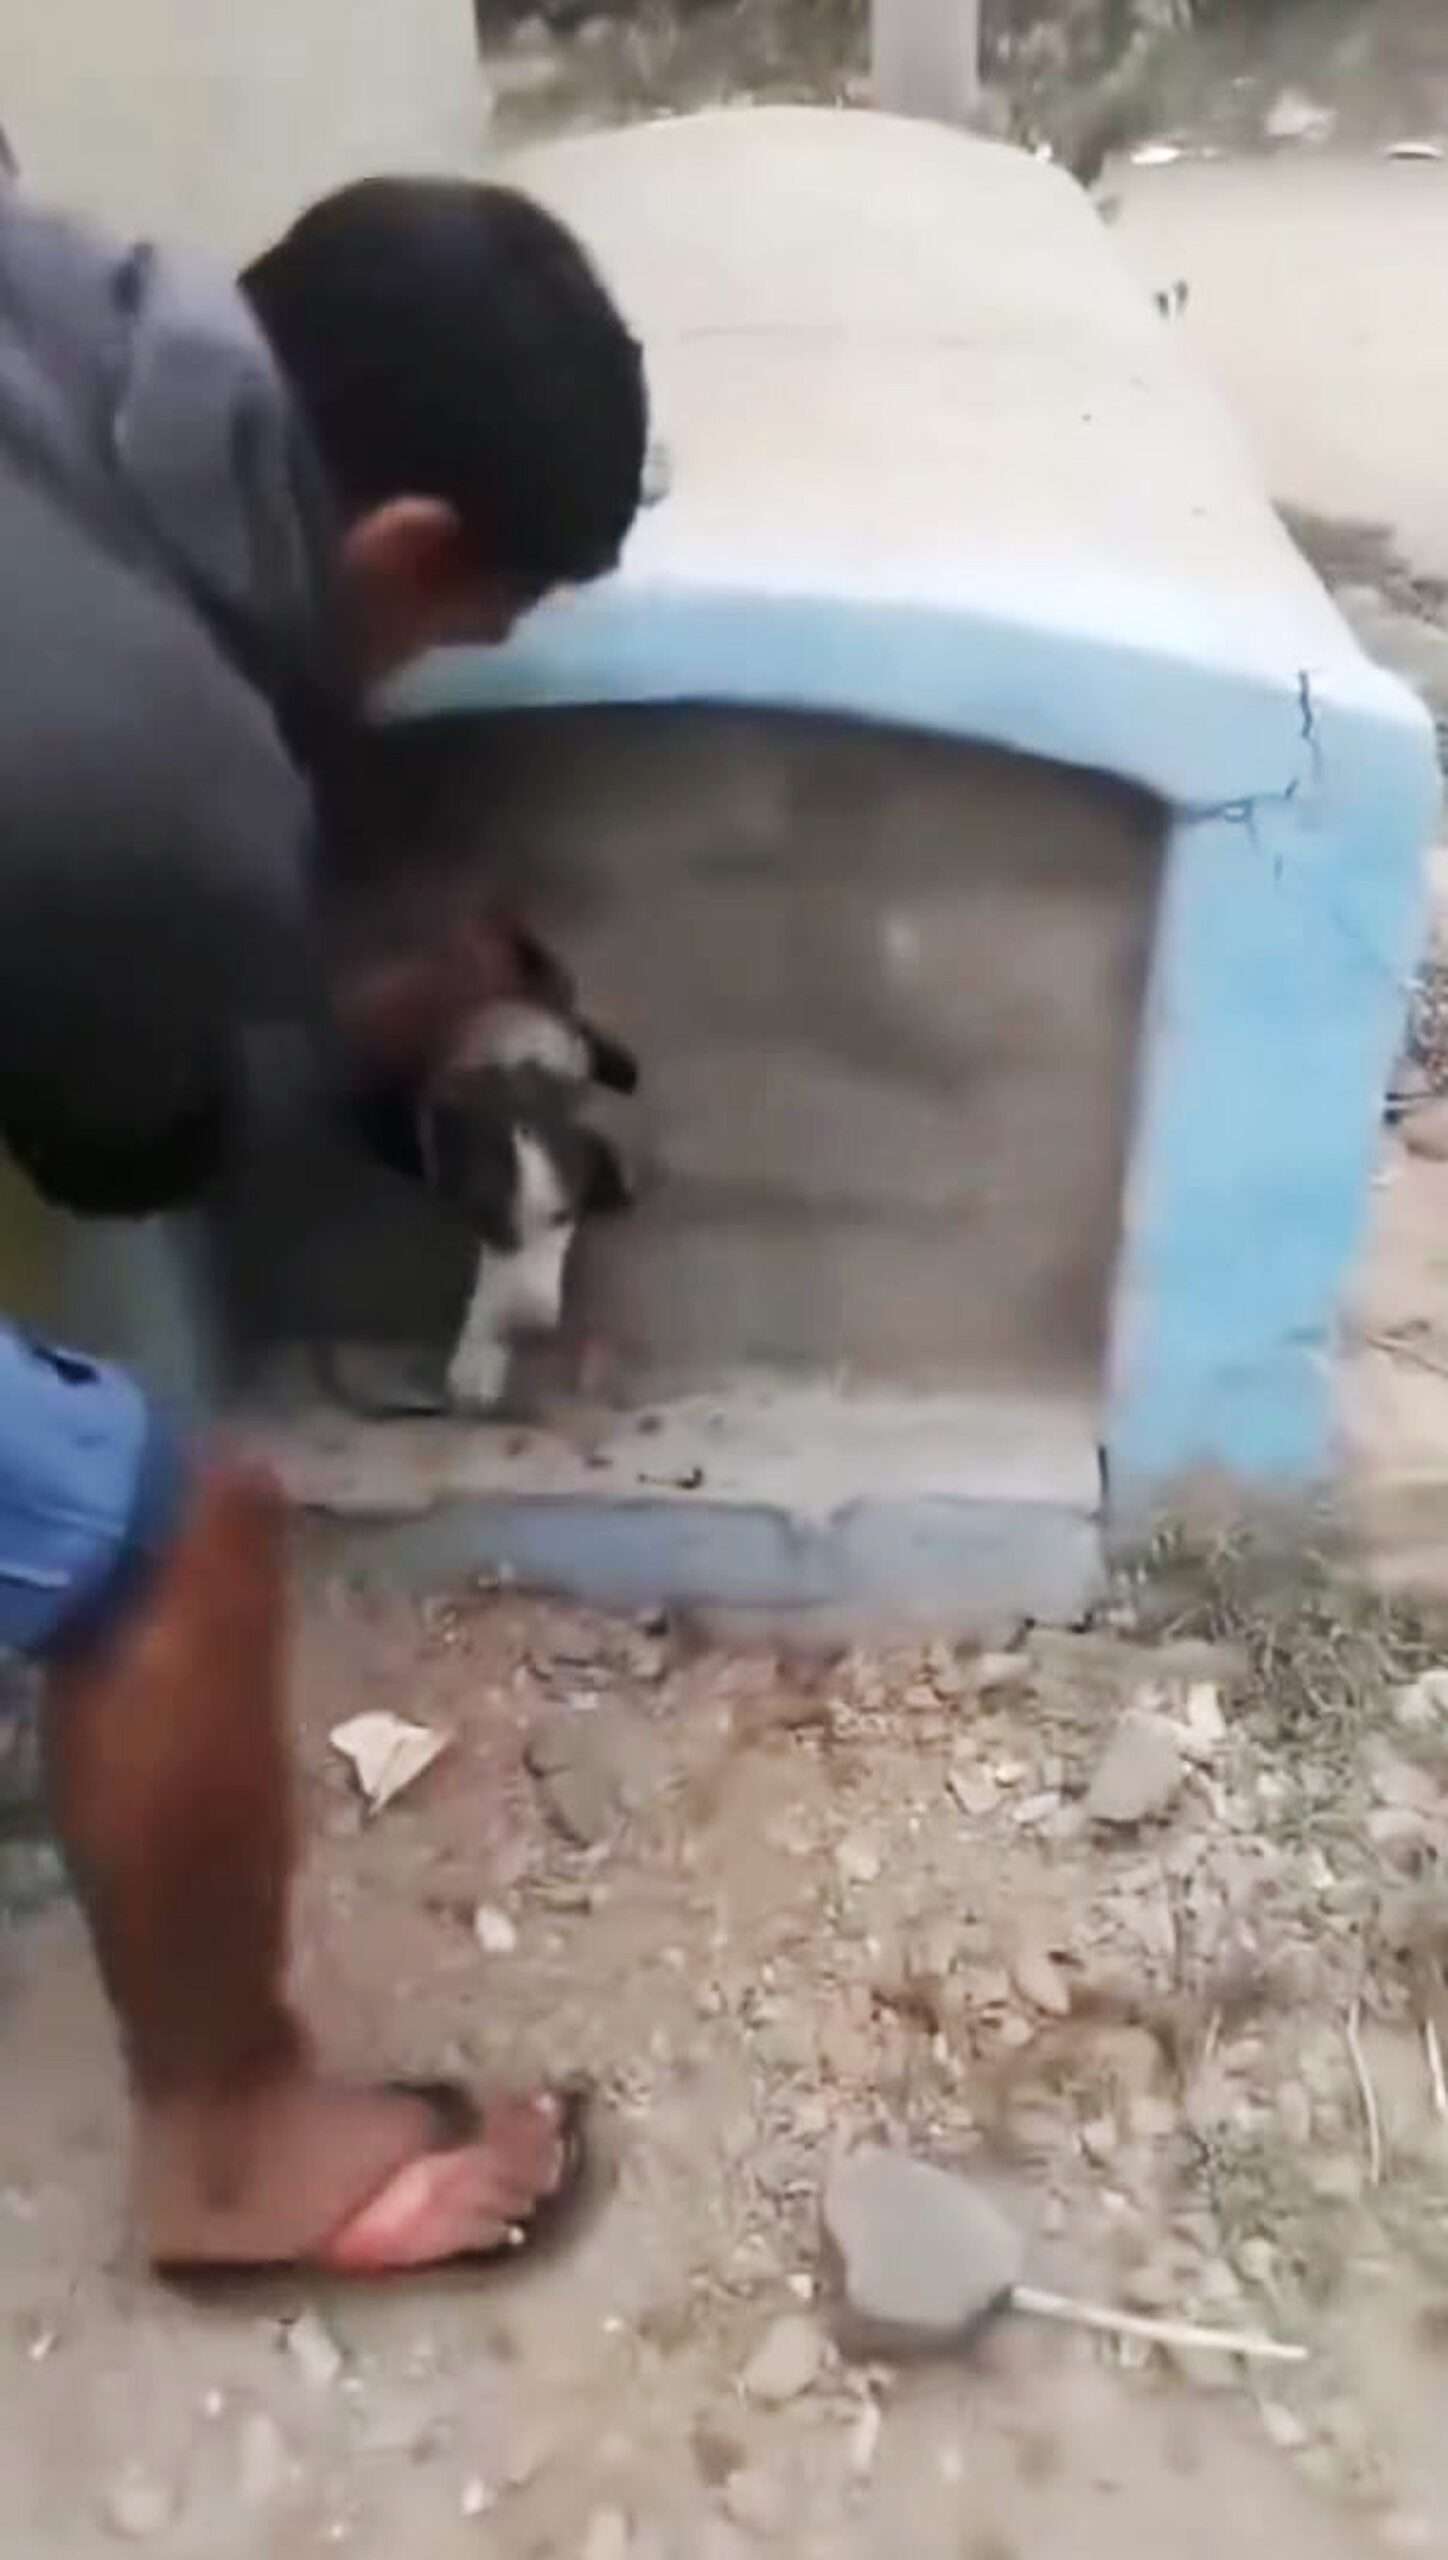 Read more about the article Courageous Citizens Free Dog Trapped In Tomb For Days As Officials Fail To Act